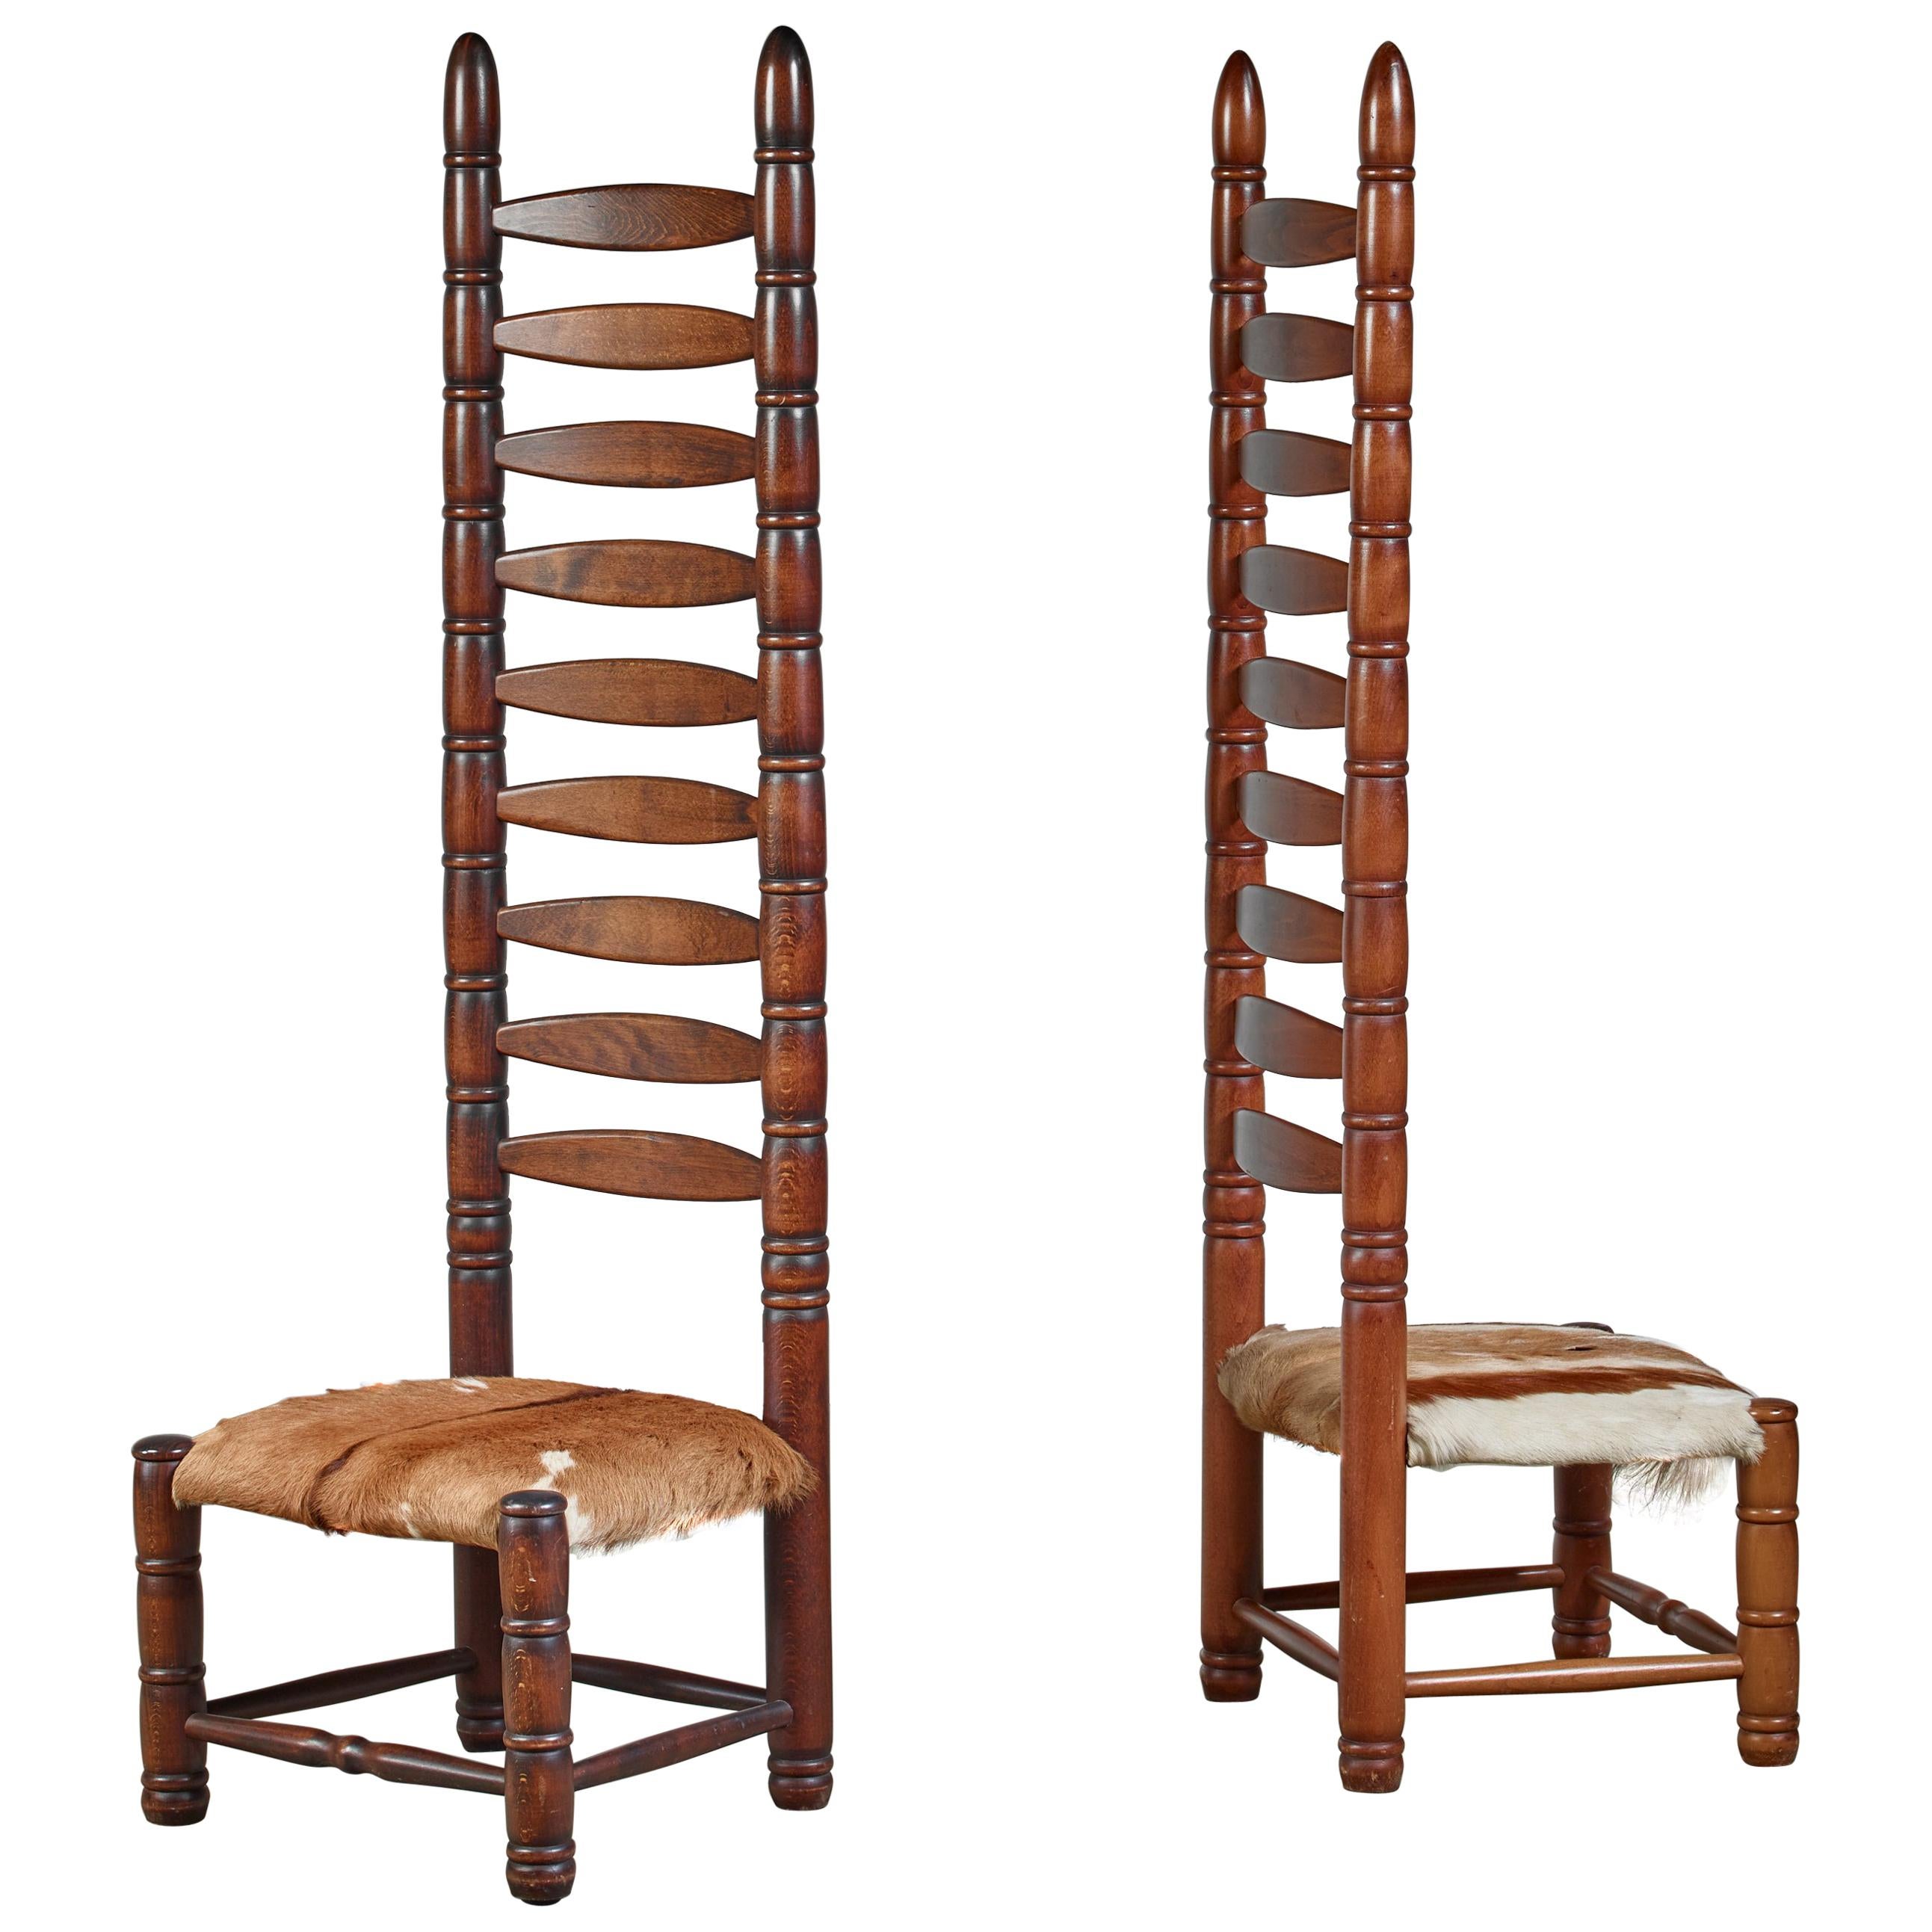 Pair of High Back Ladder Chairs with Goatskin Seating, 1960s